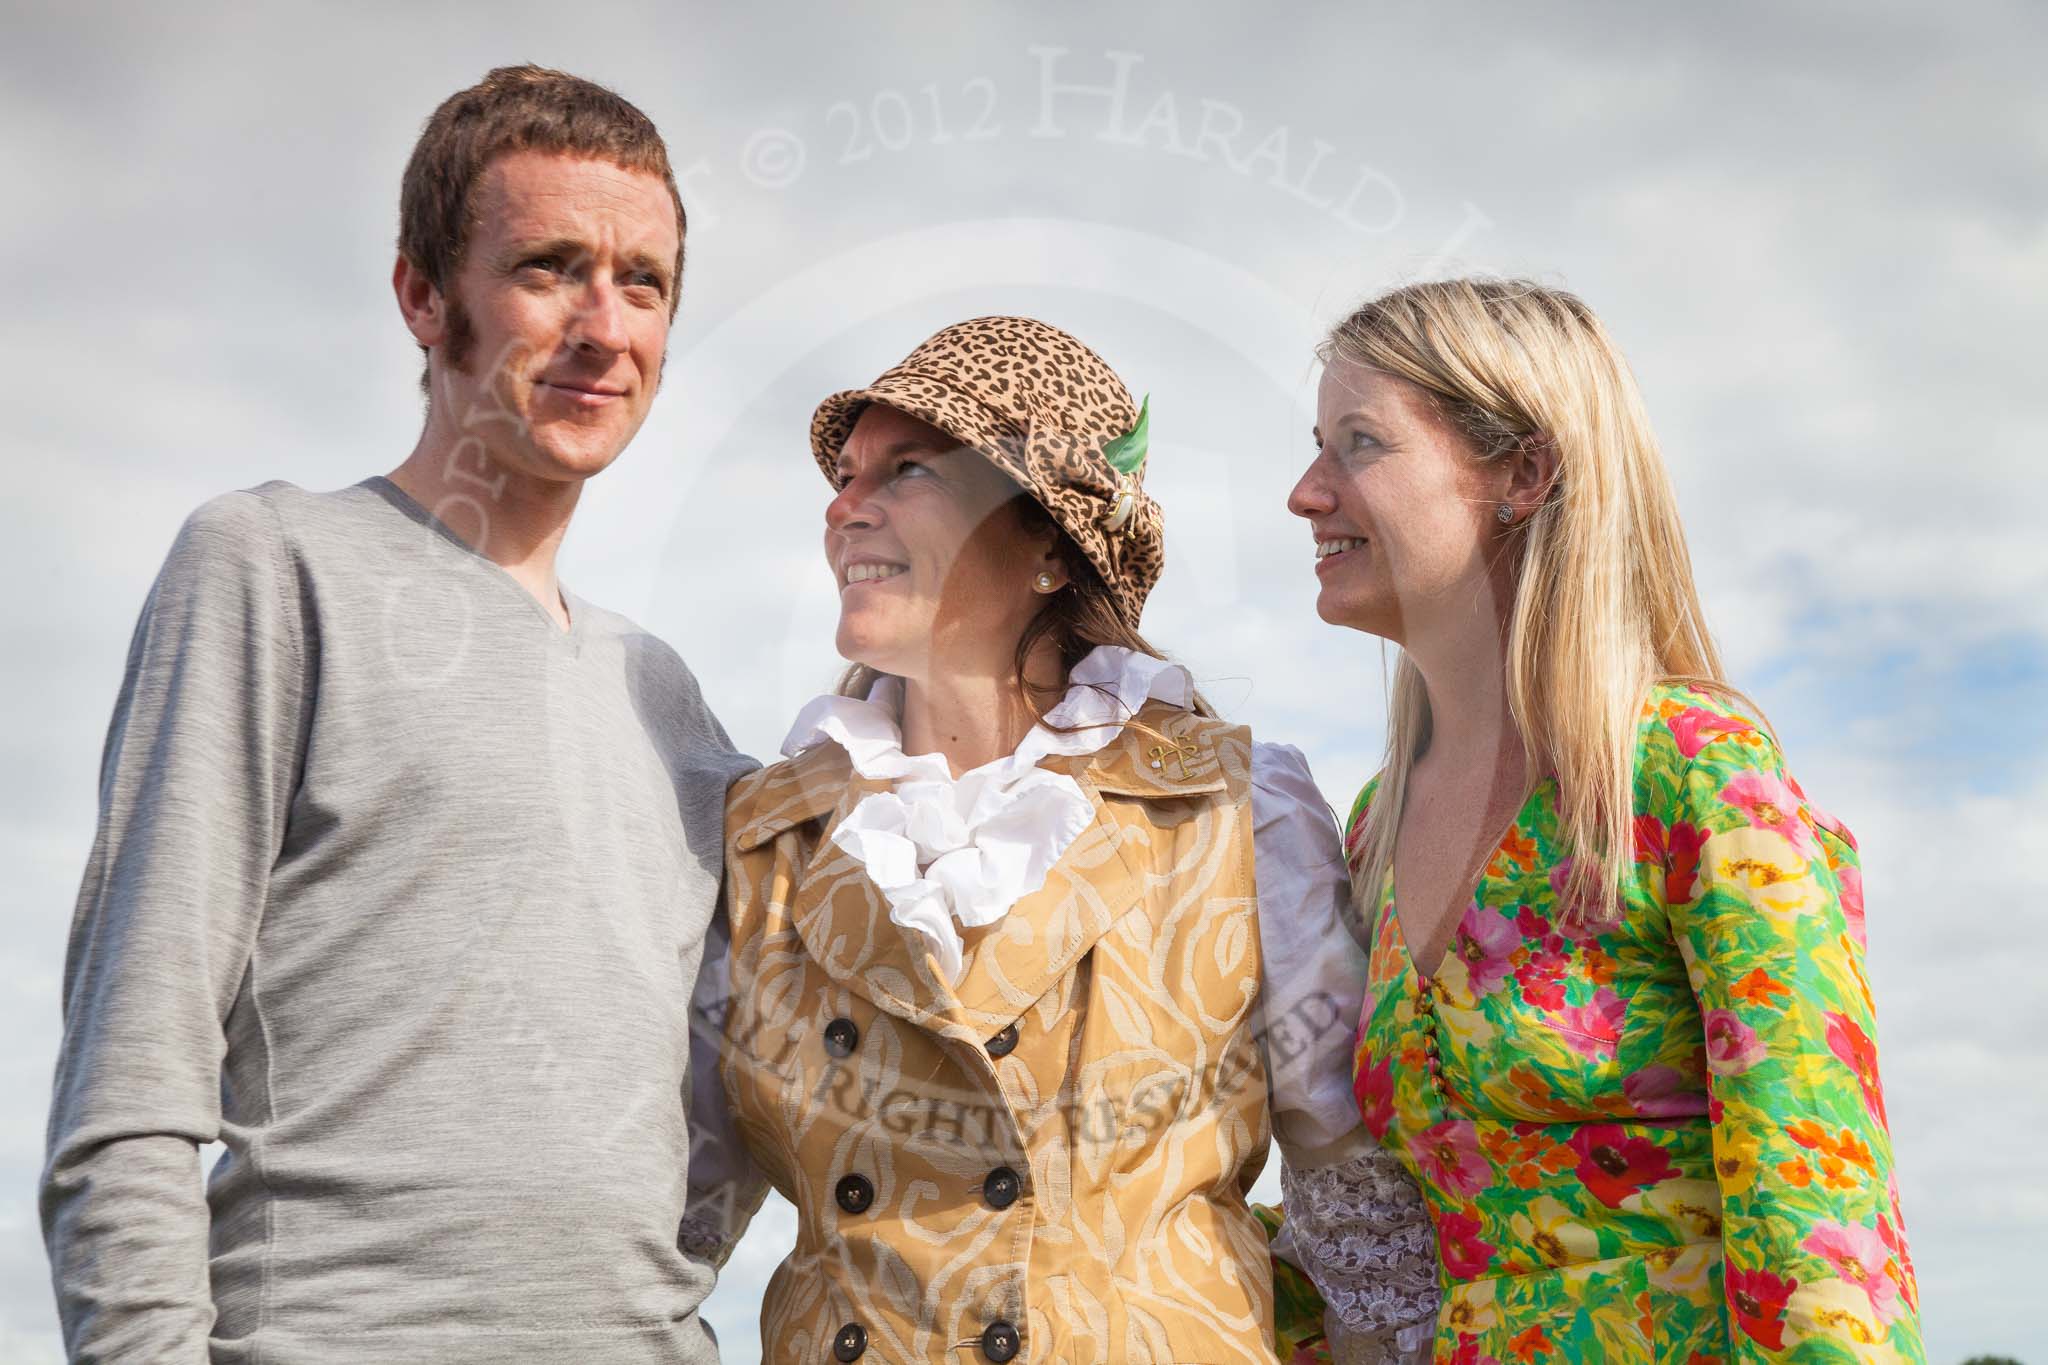 7th Heritage Polo Cup finals: Bradley Wiggins, Barbara P Zingg, Claire Cotton..
Hurtwood Park Polo Club,
Ewhurst Green,
Surrey,
United Kingdom,
on 05 August 2012 at 17:13, image #294